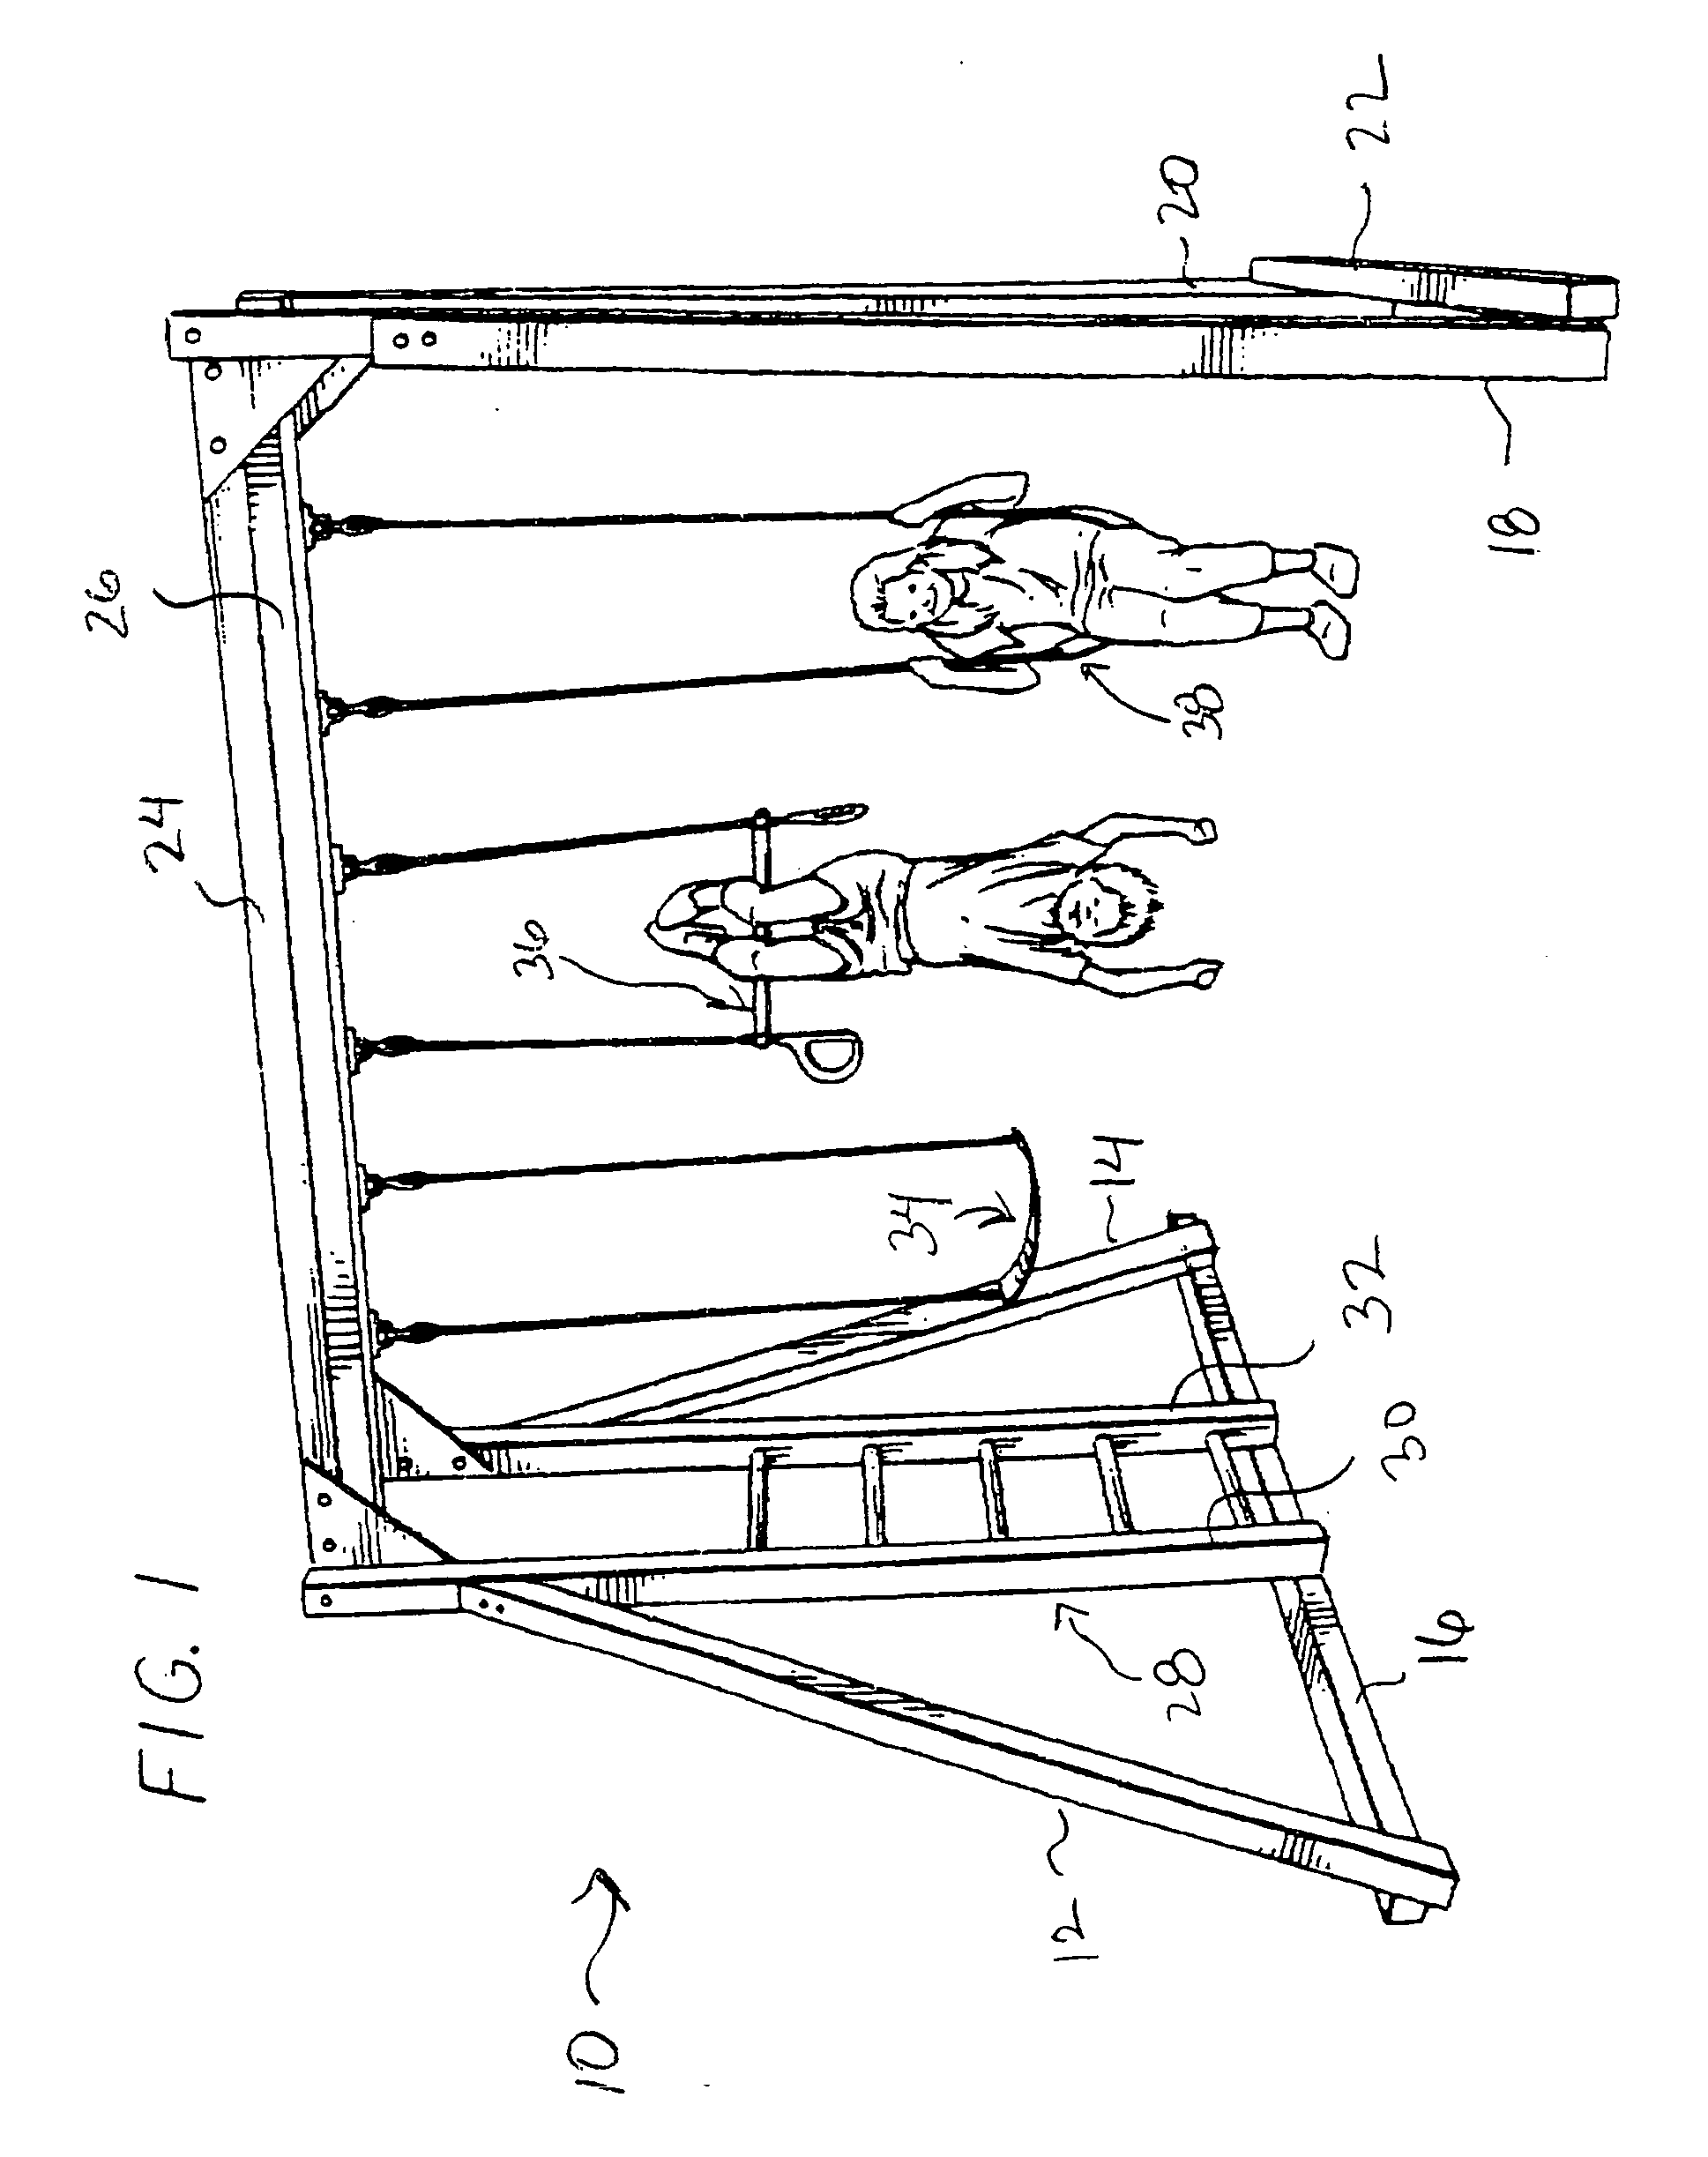 Method and apparatus for protecting a substrate